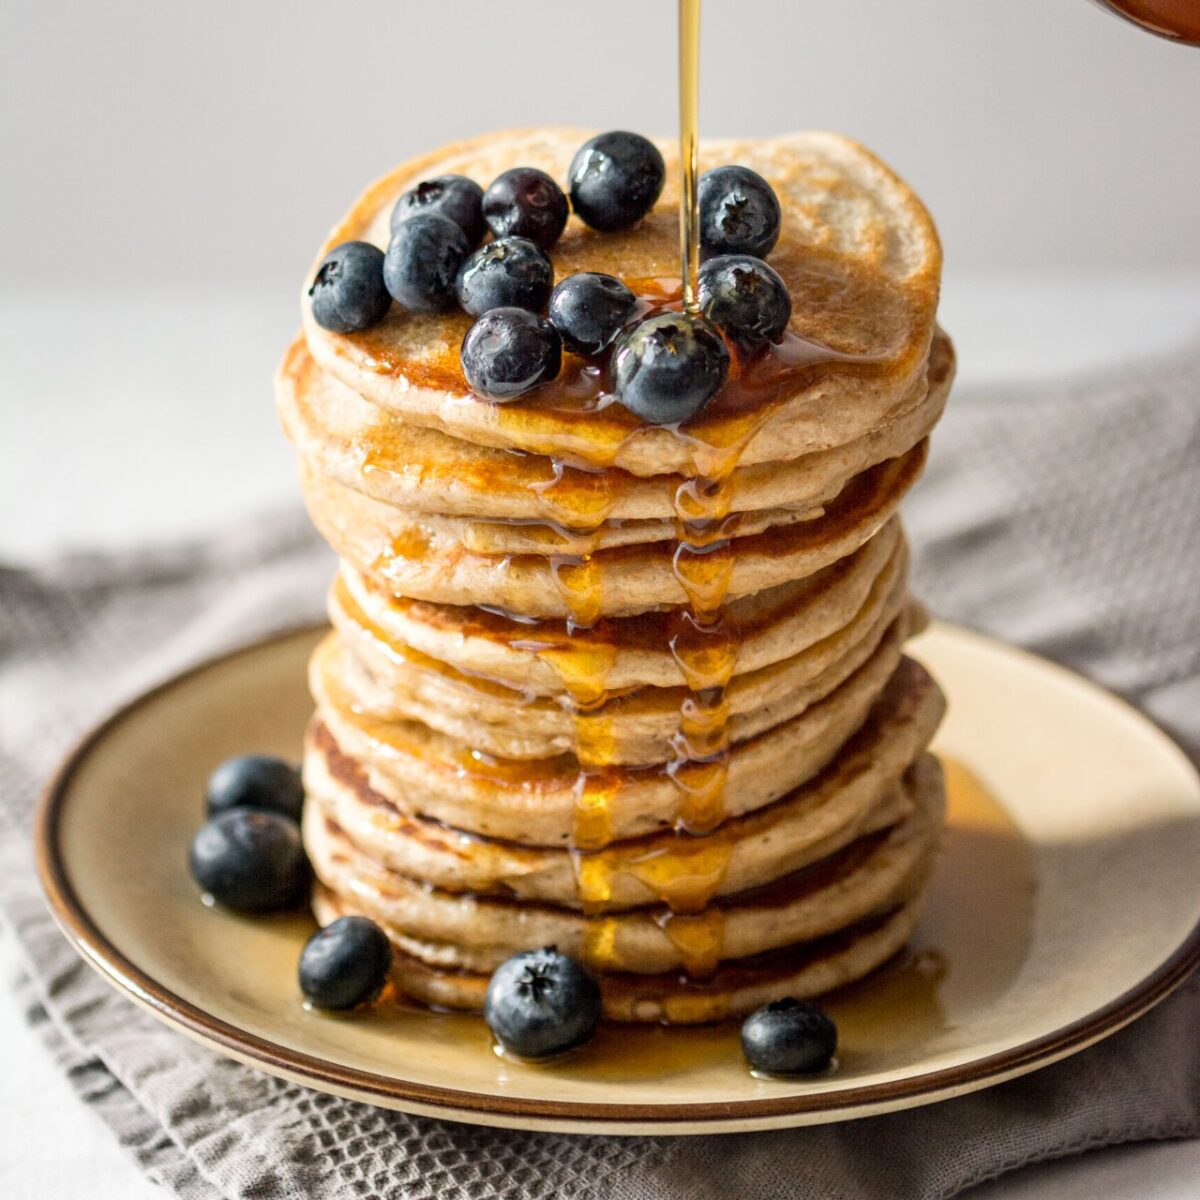 A stack of banana pancakes with maple syrup and blueberries.